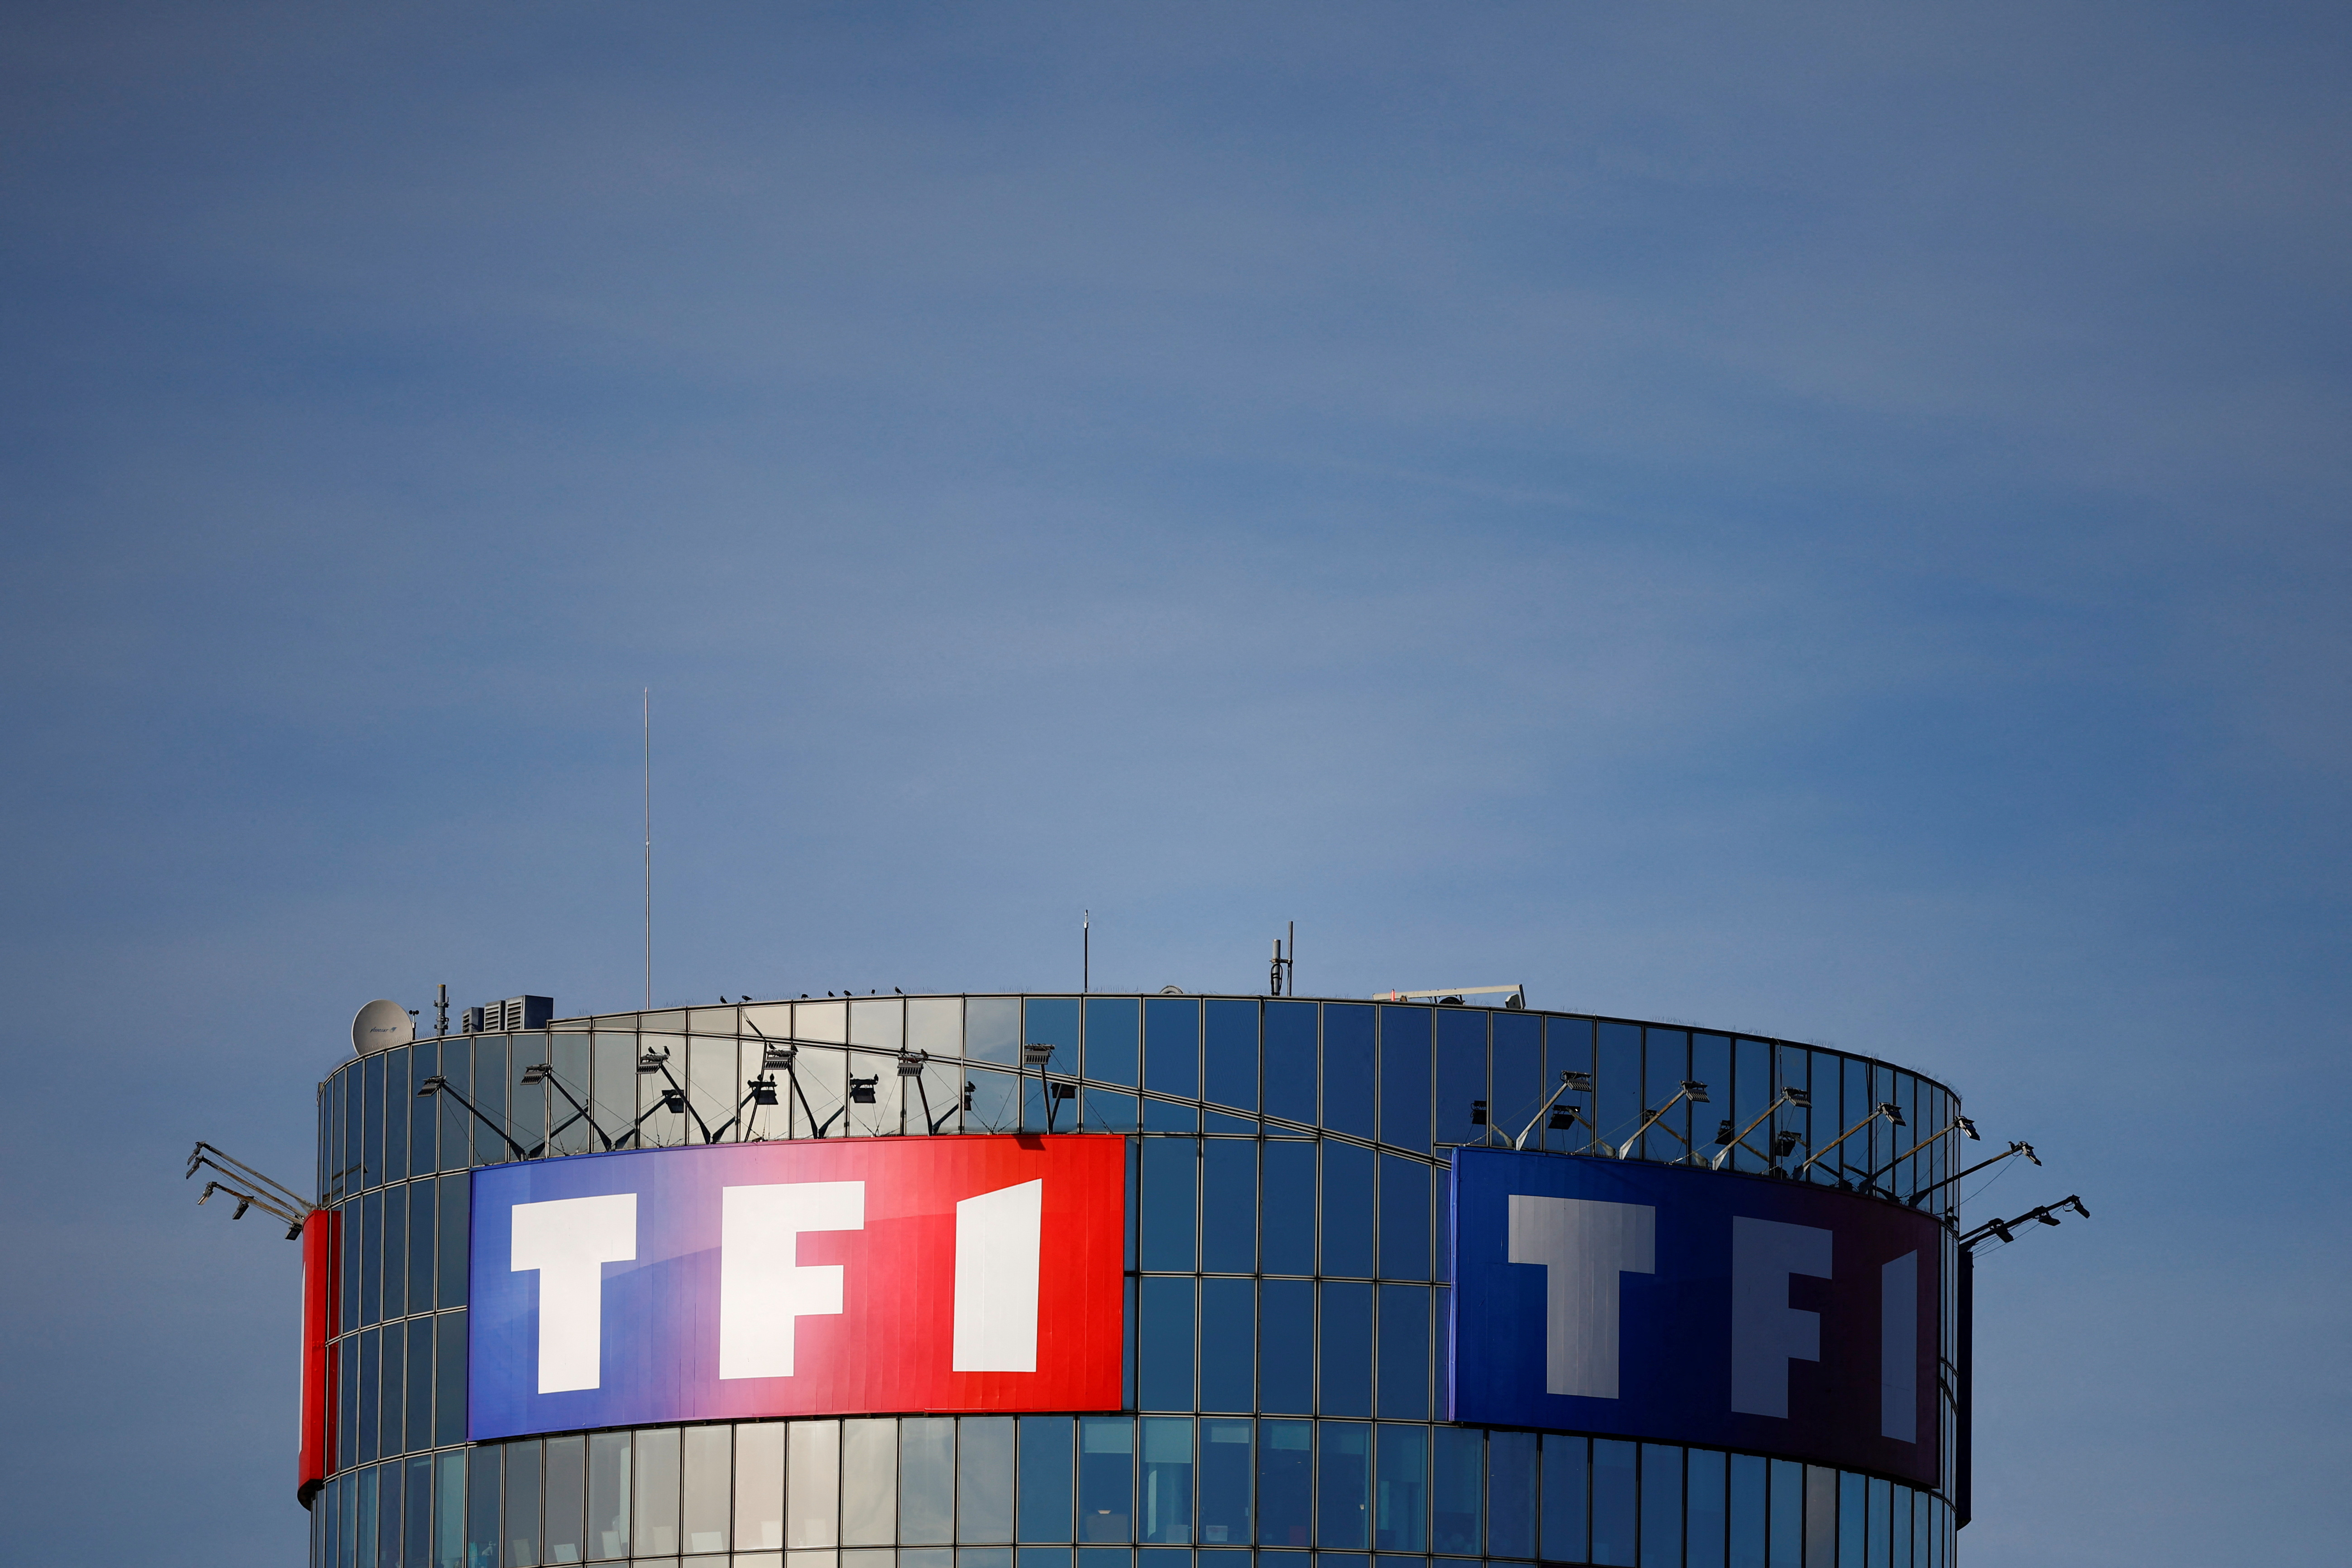 Logo of French television network TF1 is displayed at Boulogne-Billancourt headquarters near Paris